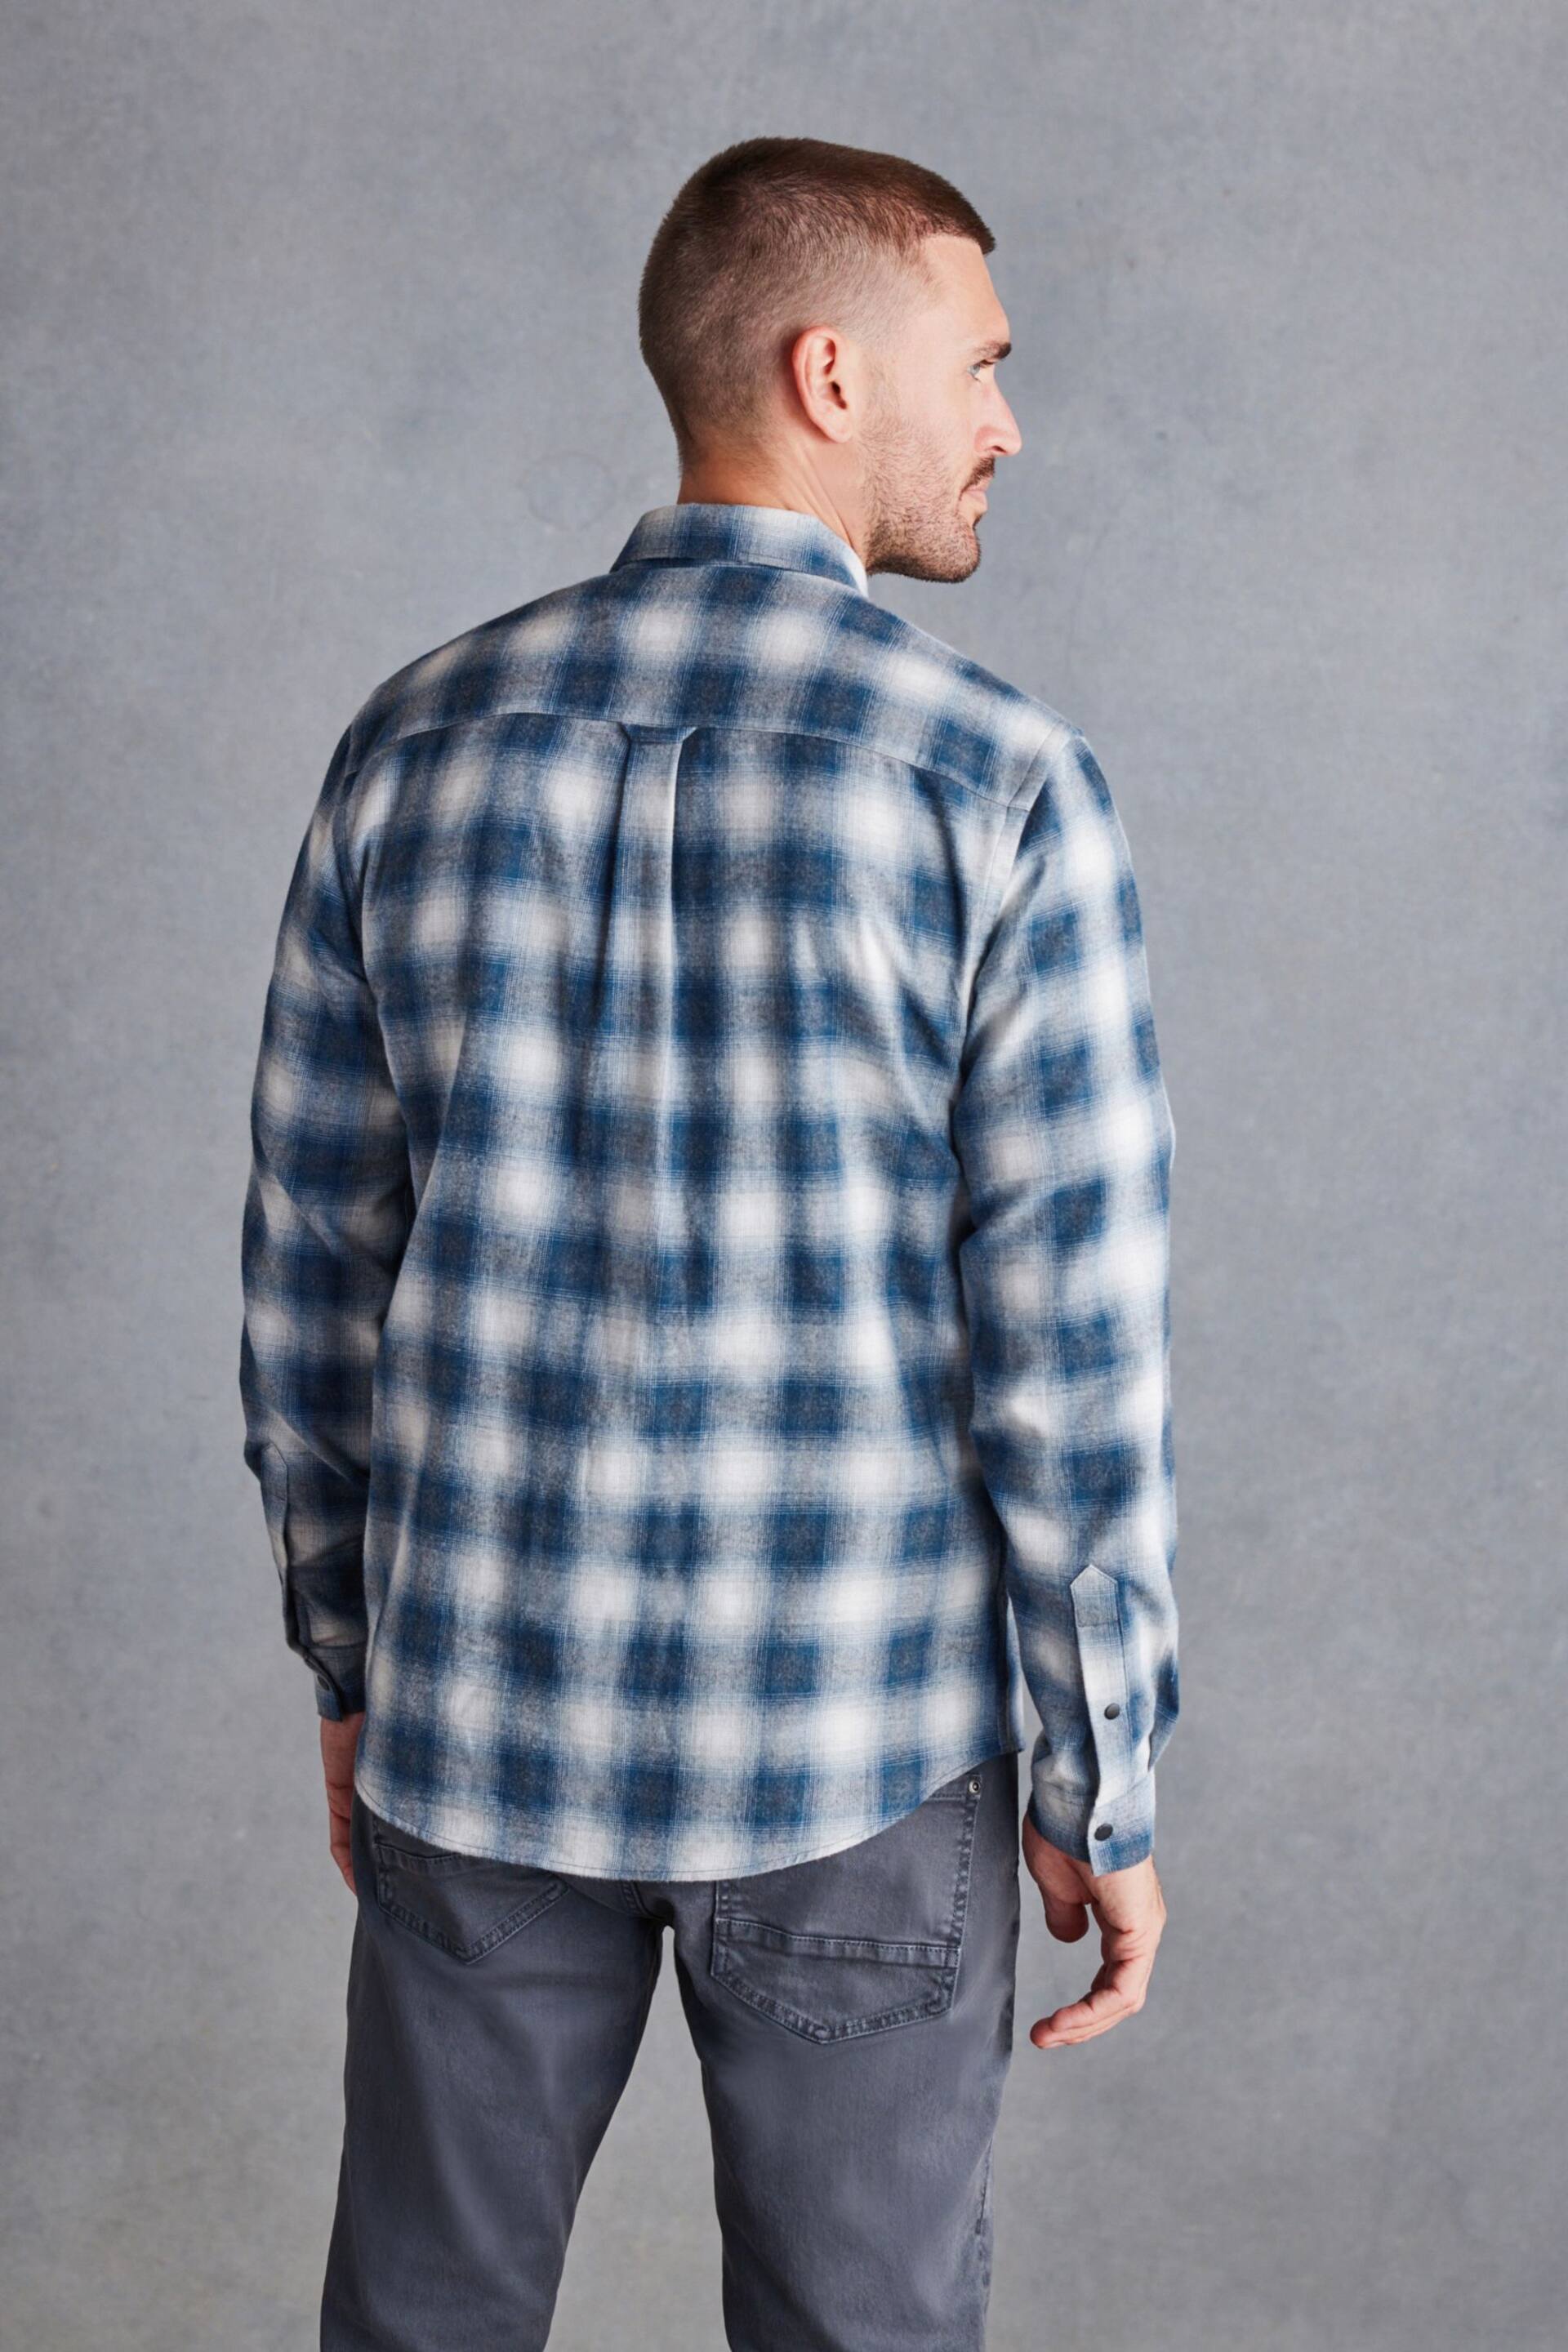 Grey/White Signature Brushed Flannel Check Shirt - Image 4 of 8